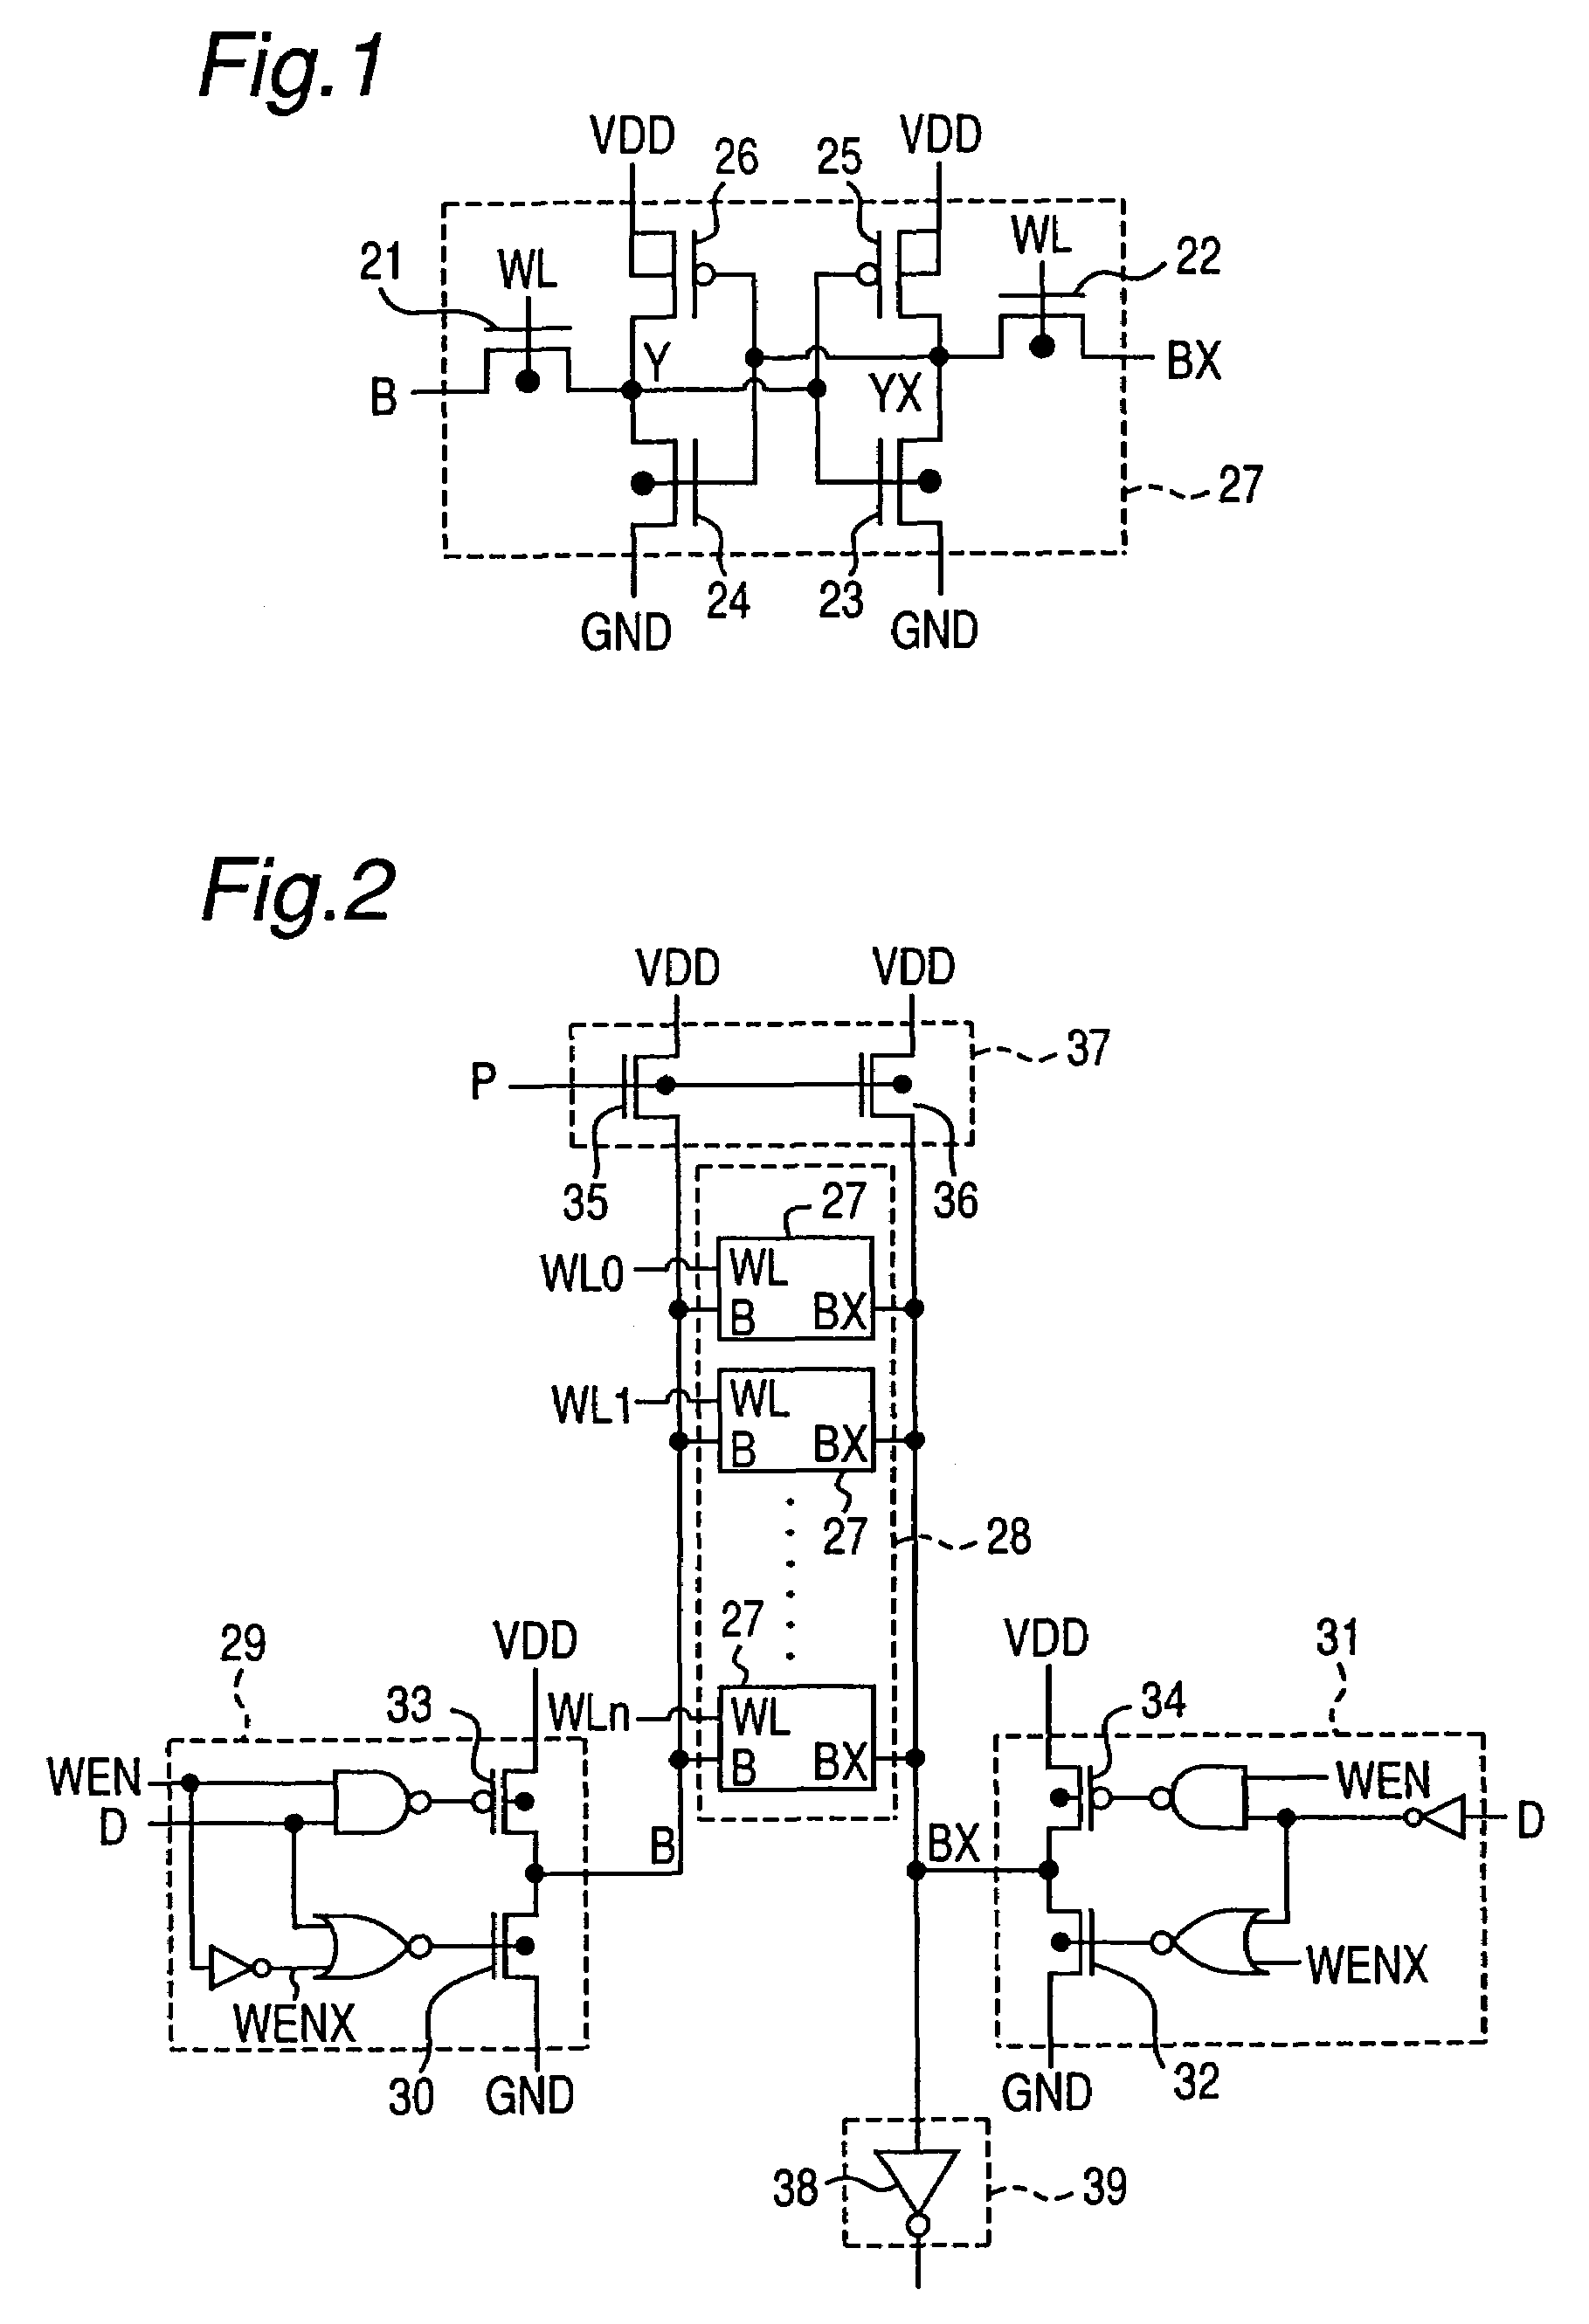 Static random access memory and semiconductor device using MOS transistors having channel region electrically connected with gate